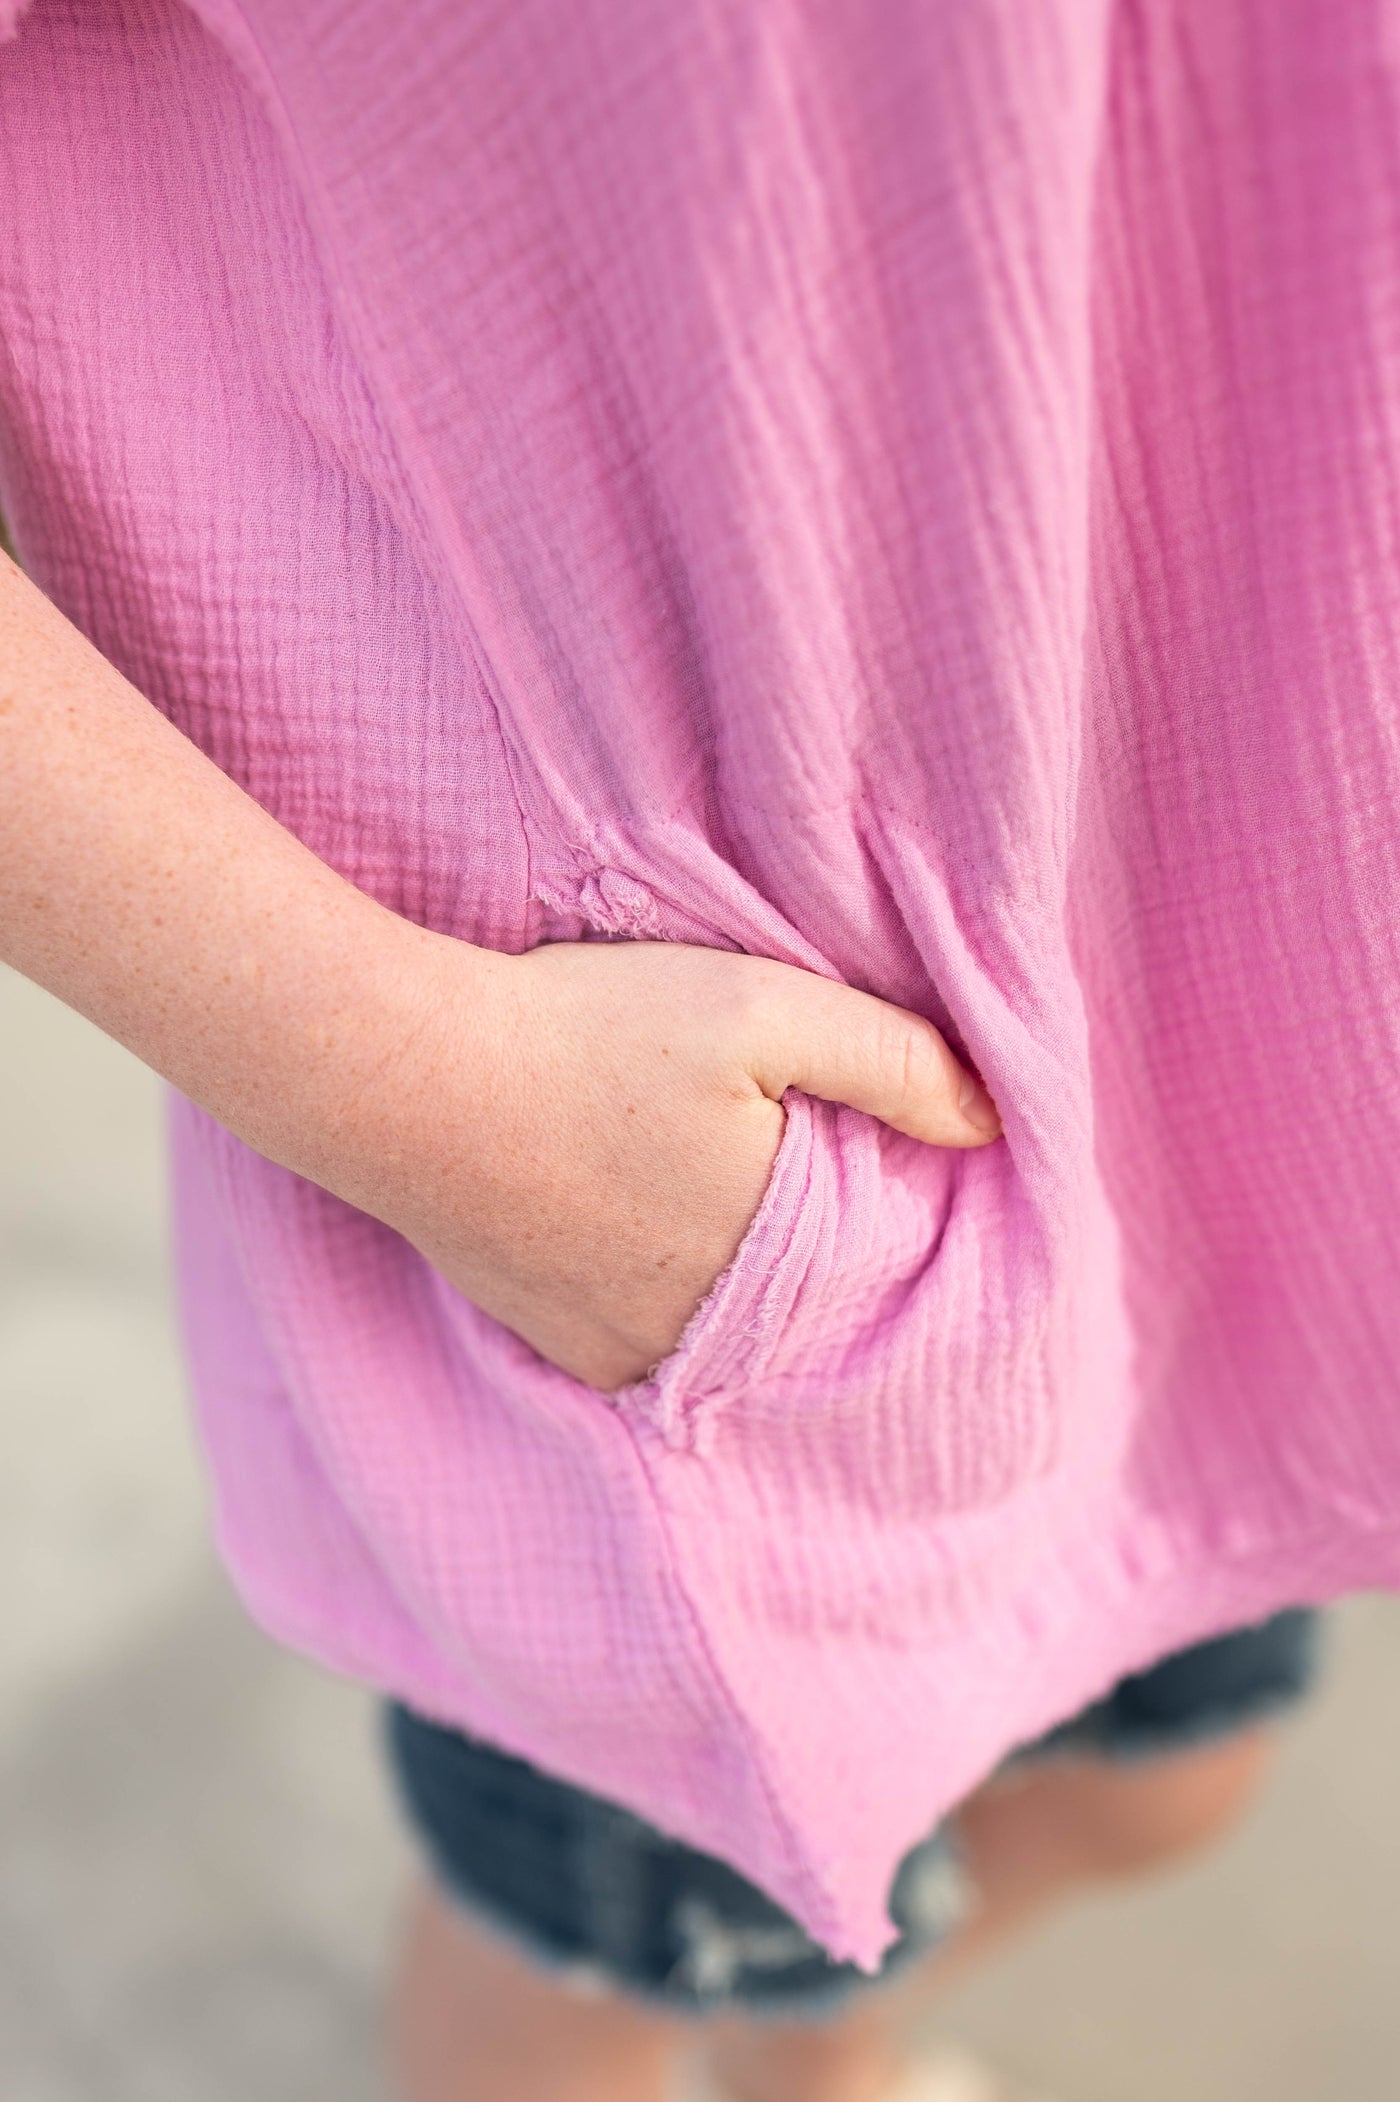 Pocket detail of a mauve short sleeve top with a v-neck.